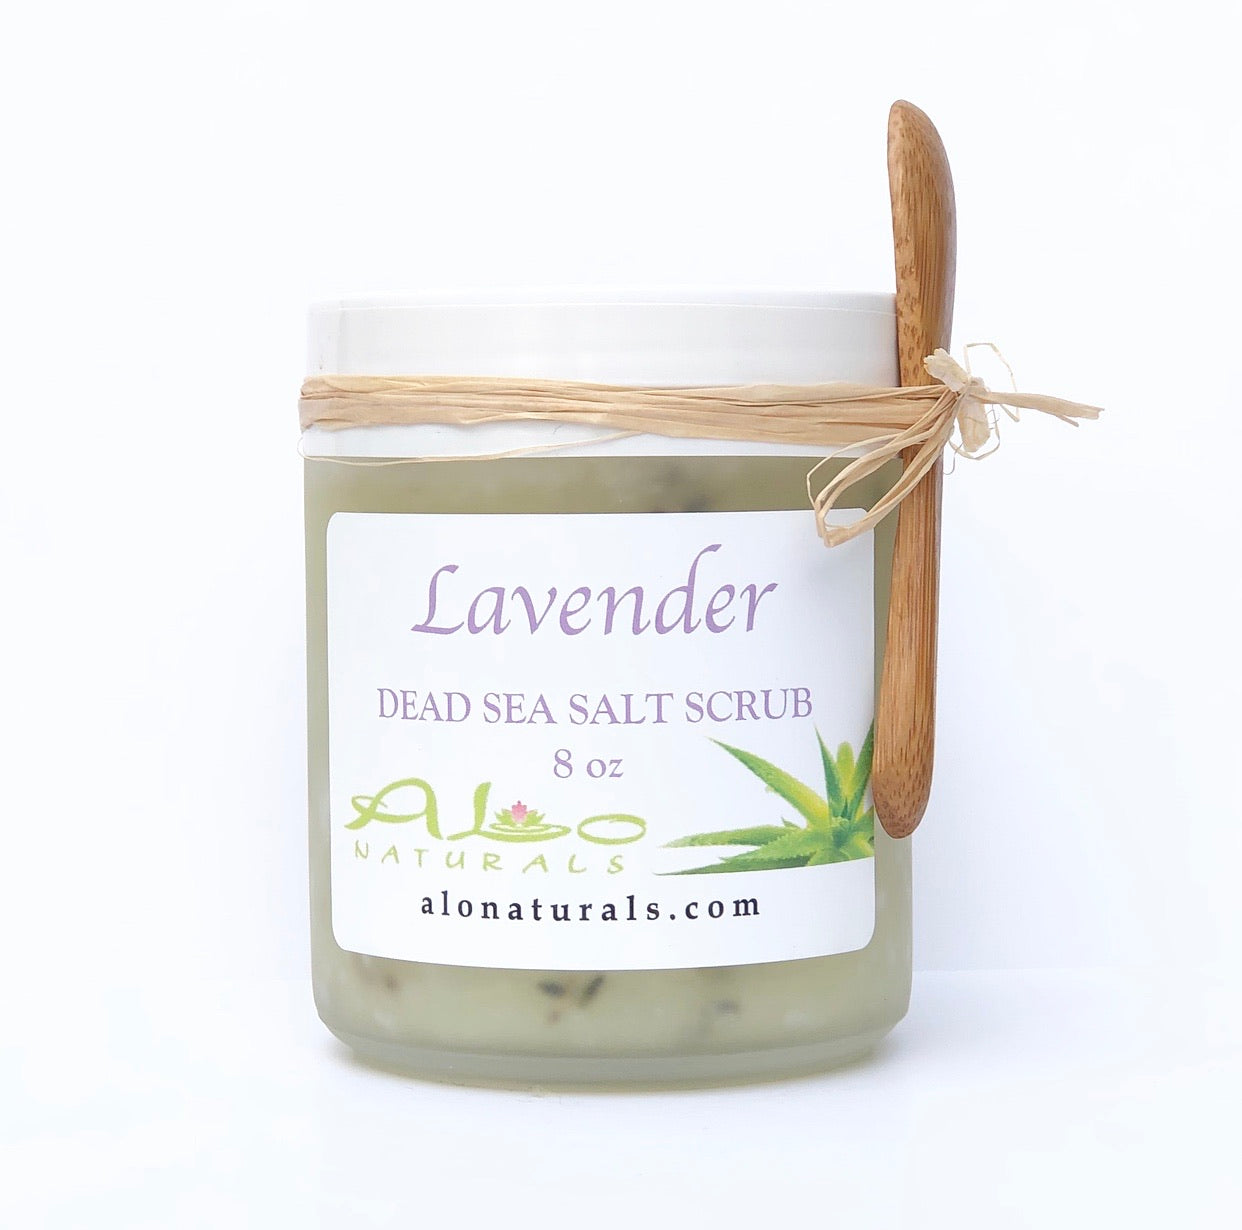 Lavender Dead Sea salt scrub.  Natural ingredients.  Made with Dead Sea salt and scented with essential oils, our scrubs promote soft, luxurious feeling skin.  Natural way to health and wellness, detox, anti-aging, healing, and renewal of skin.  Nourish, Exfoliate, and Hydrate.  3 in 1!  8 ounce jar.  Comes with bamboo scooping spoon.